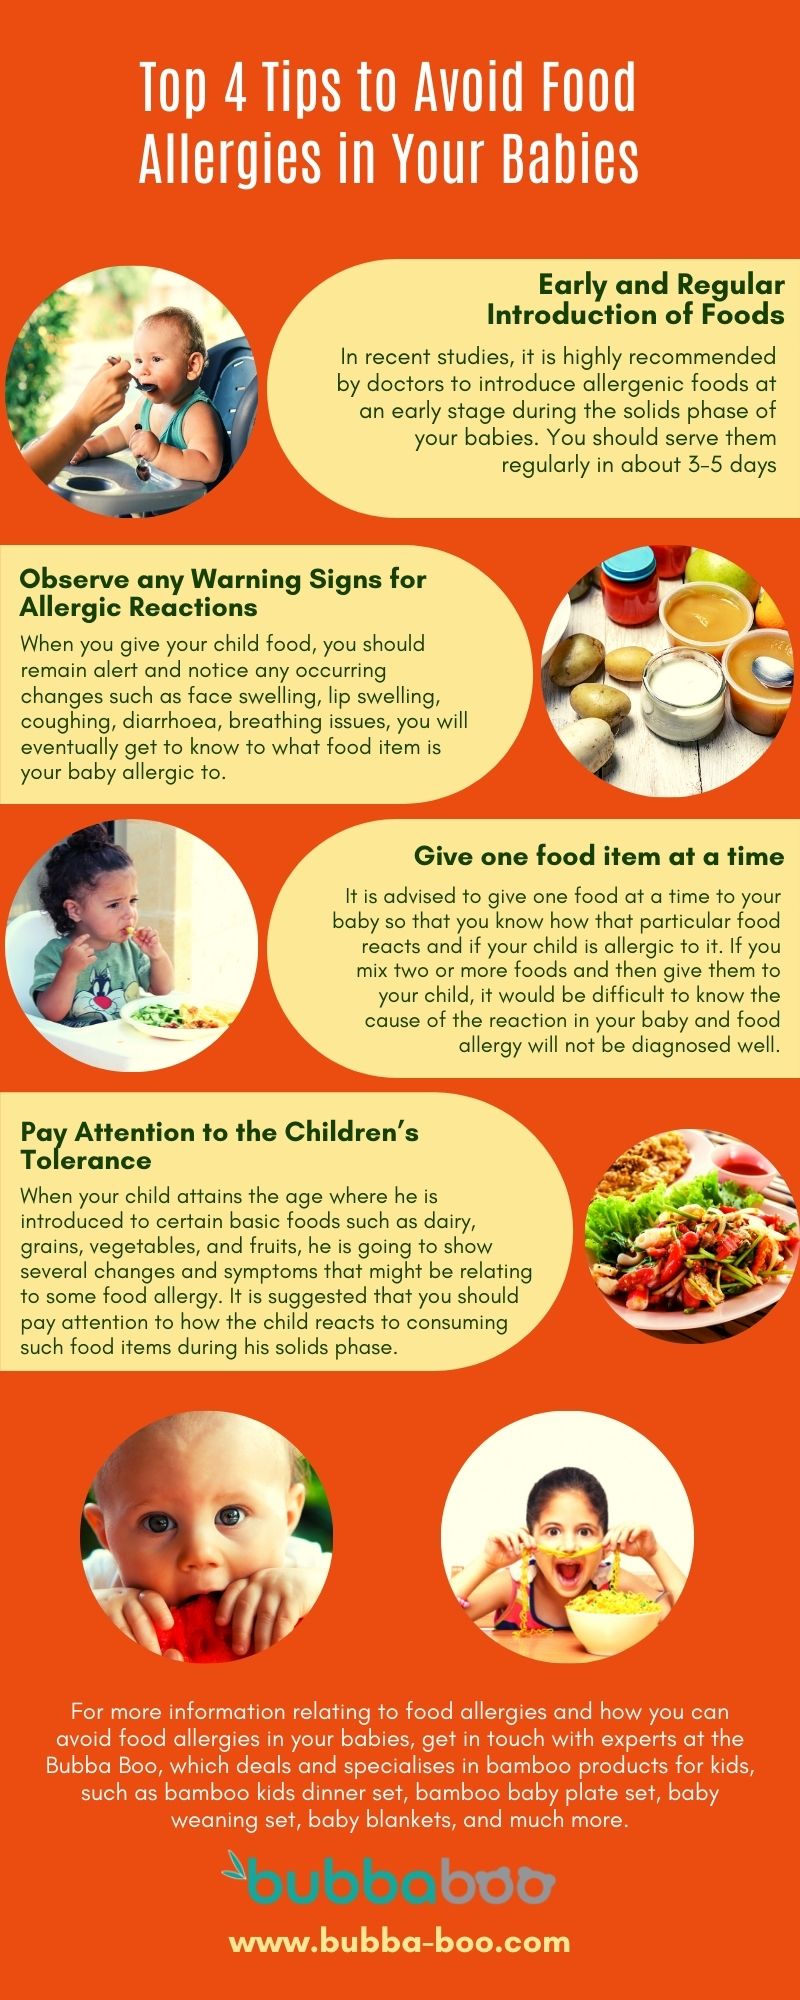 Top 4 Tips to Avoid Food Allergies in Your Babies